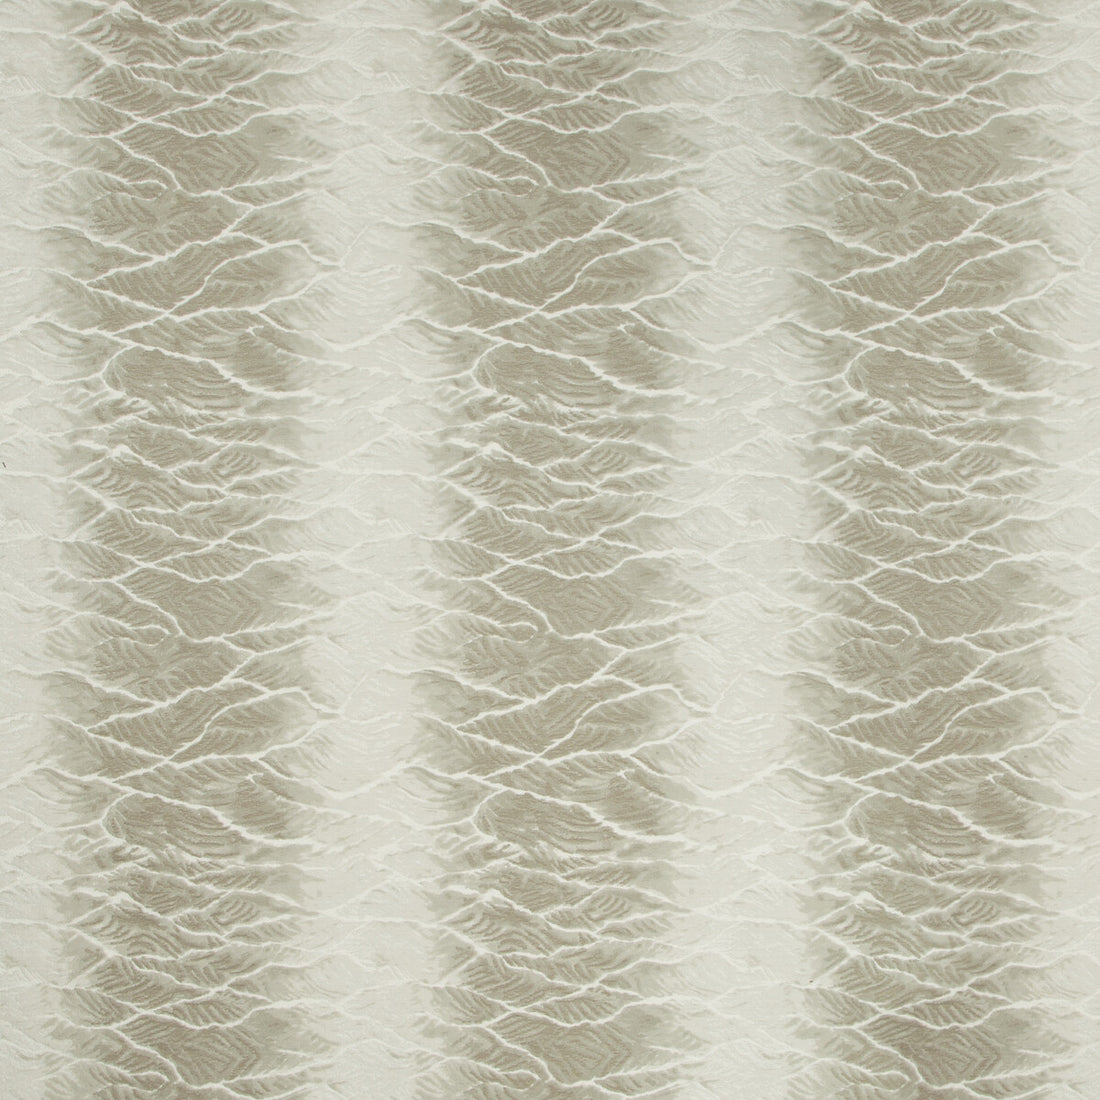 Onsen fabric in platinum color - pattern 35415.11.0 - by Kravet Couture in the Izu Collection collection